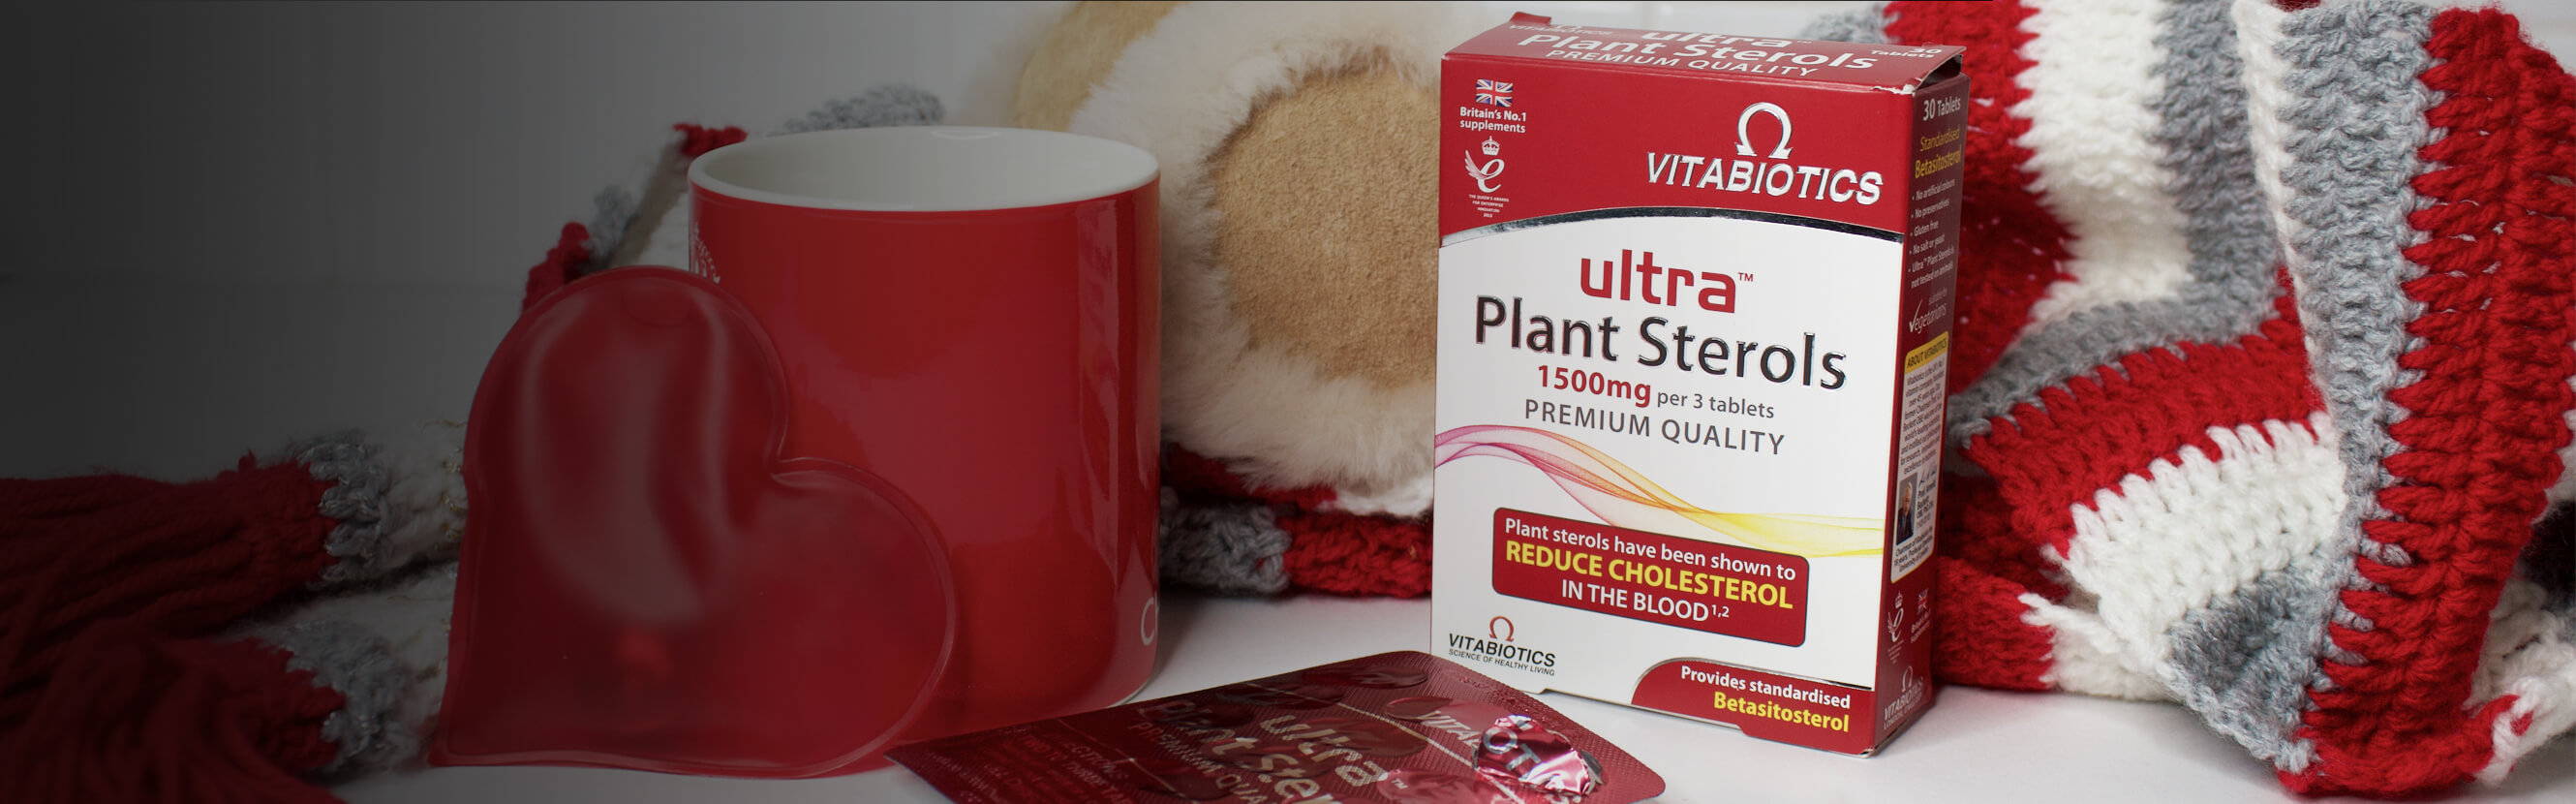  Ultra Plant Sterols Pack Next To A Red Mug 